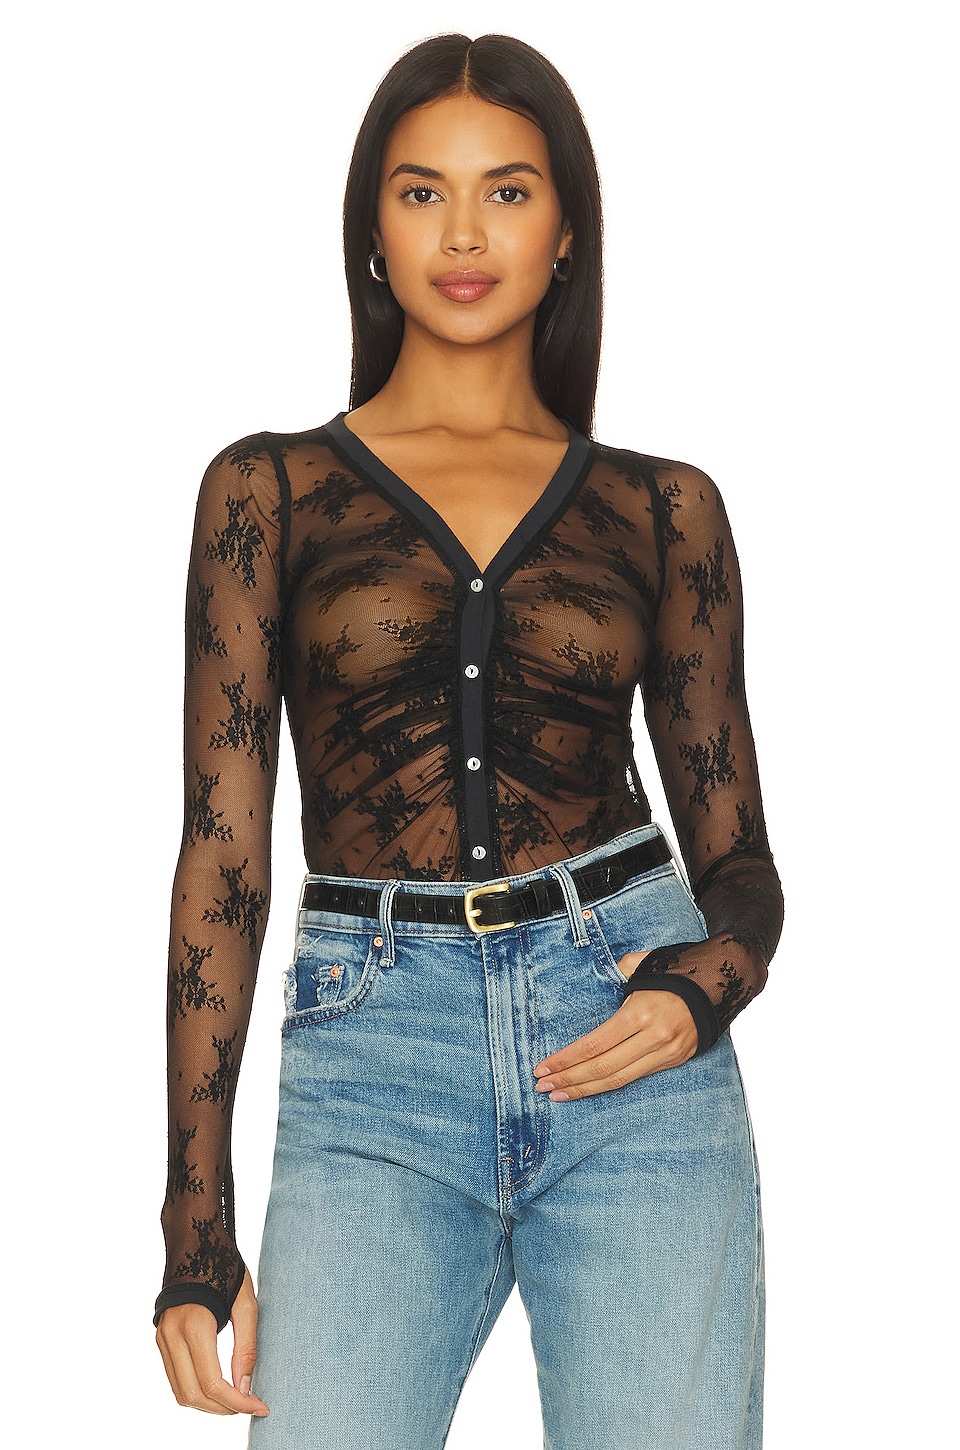 NEW Free People Movement Polish Up Bodysuit in Sparkle Black XS/S-M/L |  FF-012